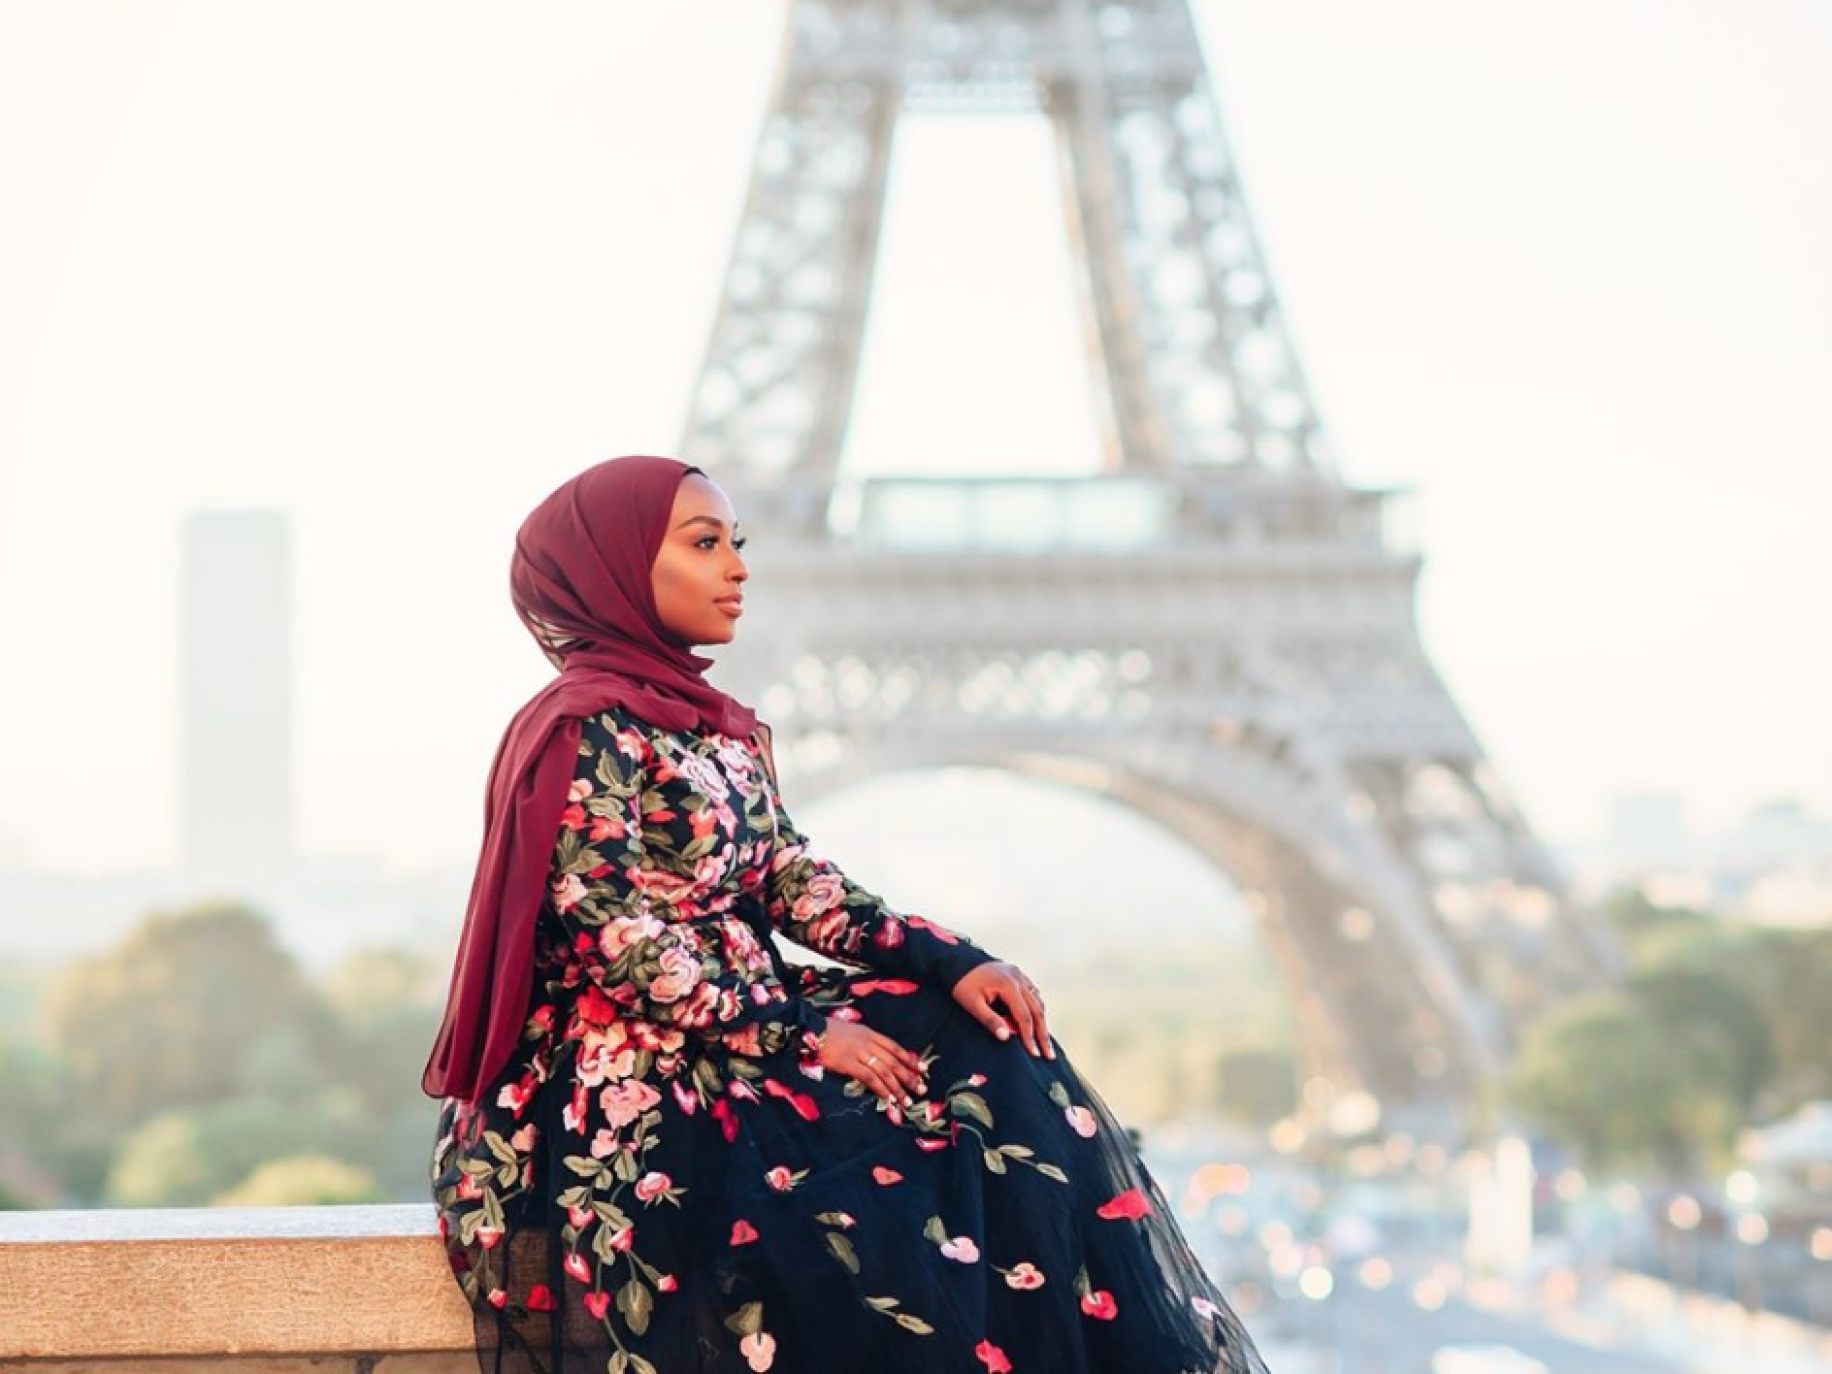 Black Travel Vibes: Fall In Love With The Romantic Vibes Of Paris